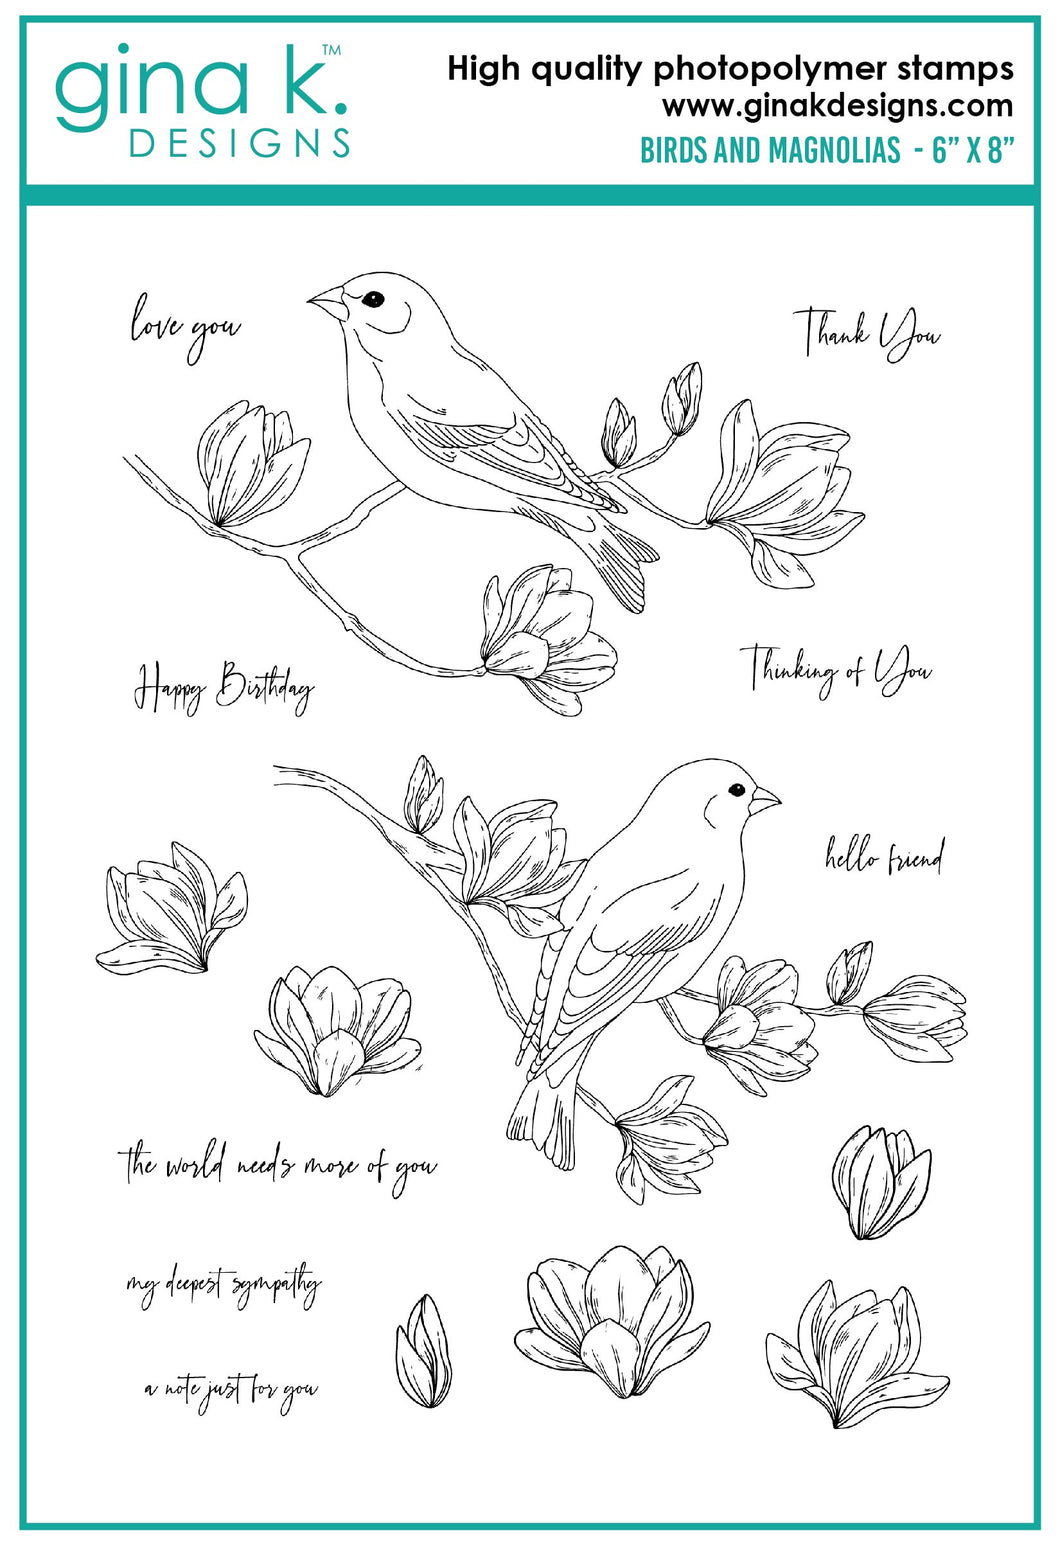 Gina K. Designs - Stamp & Die Set - Birds and Magnolias. Birds and Magnolias is a set by Hannah Drapinski. This set is made of premium clear photopolymer and measures 6